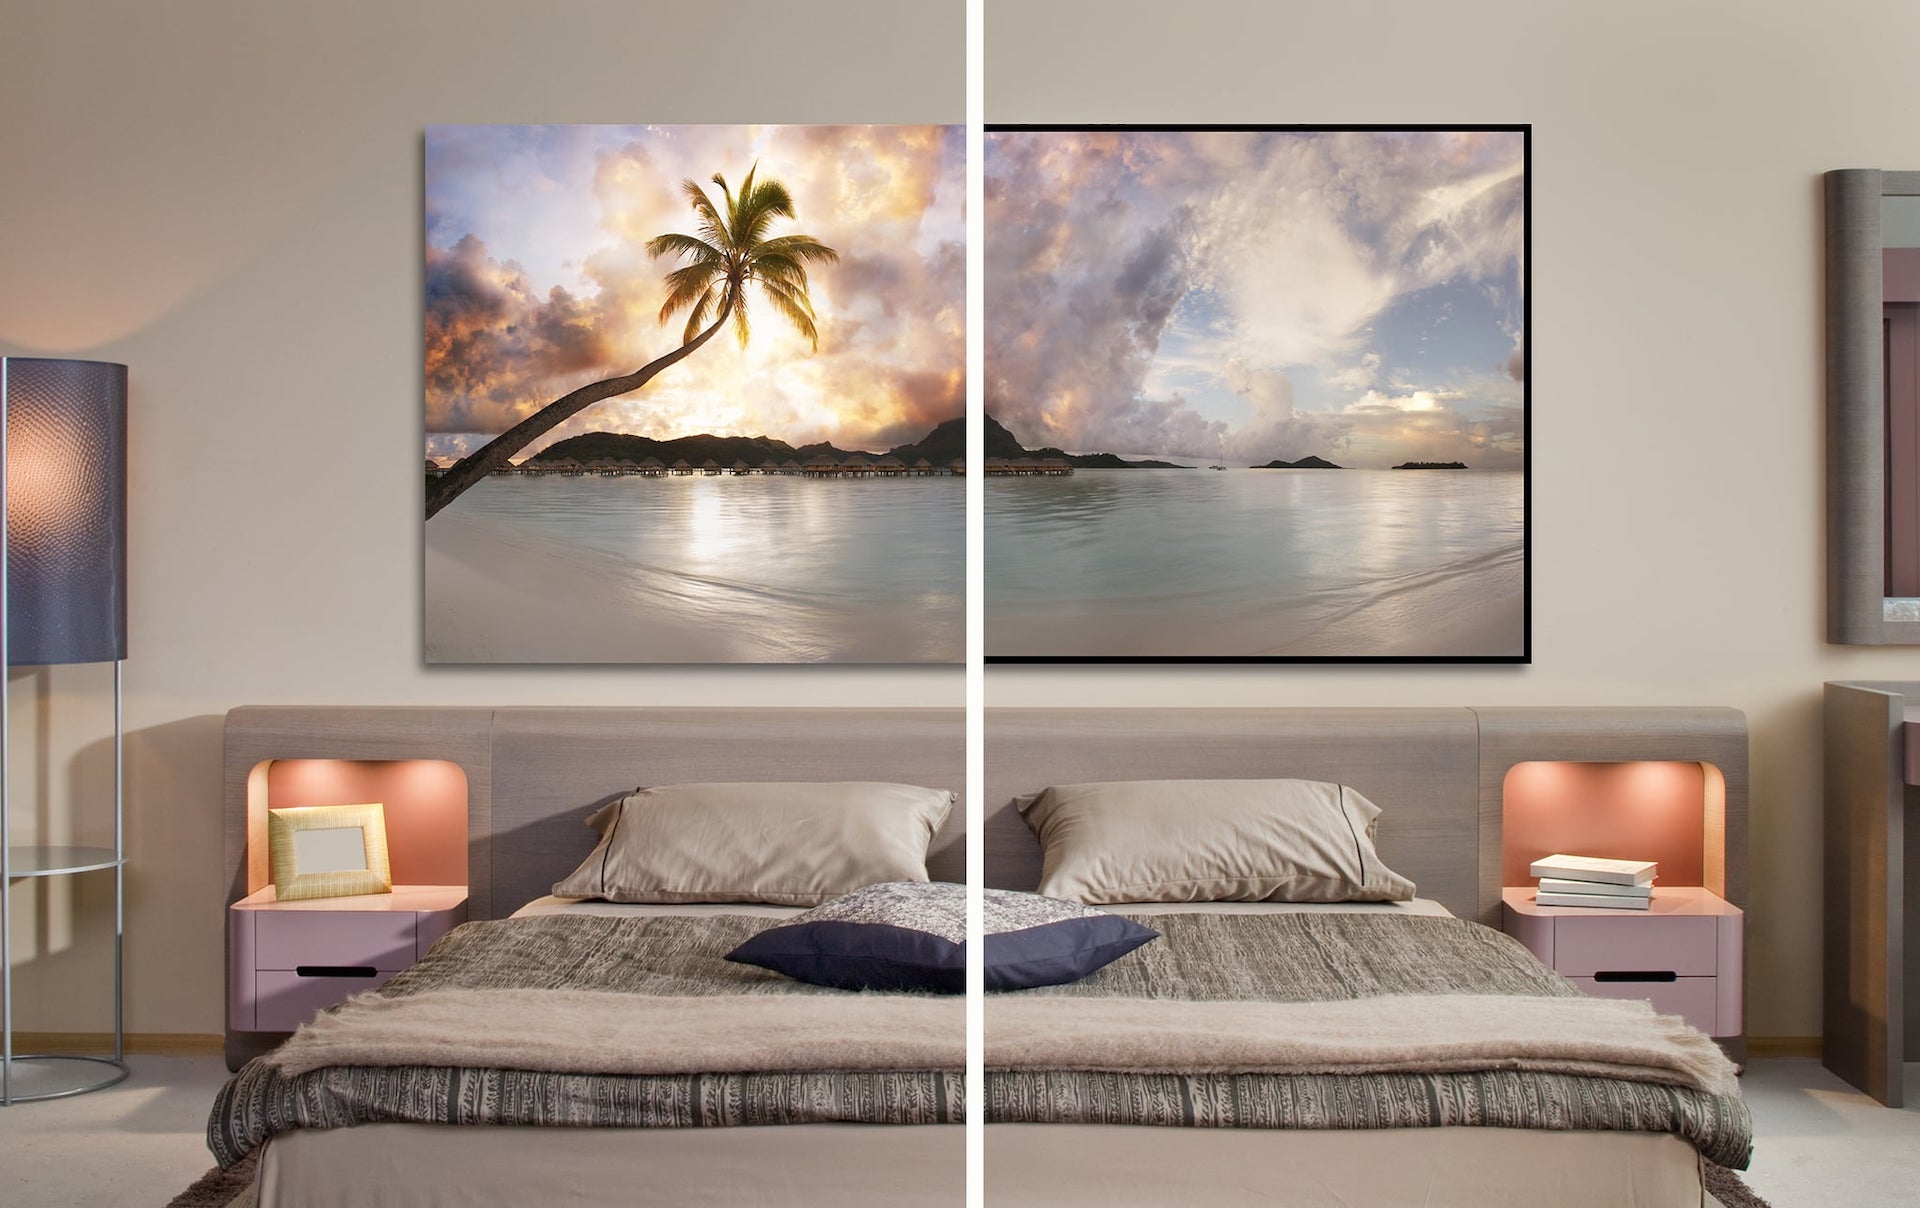 How To Easily Choose The Right Type Of Wall Art For Your Home